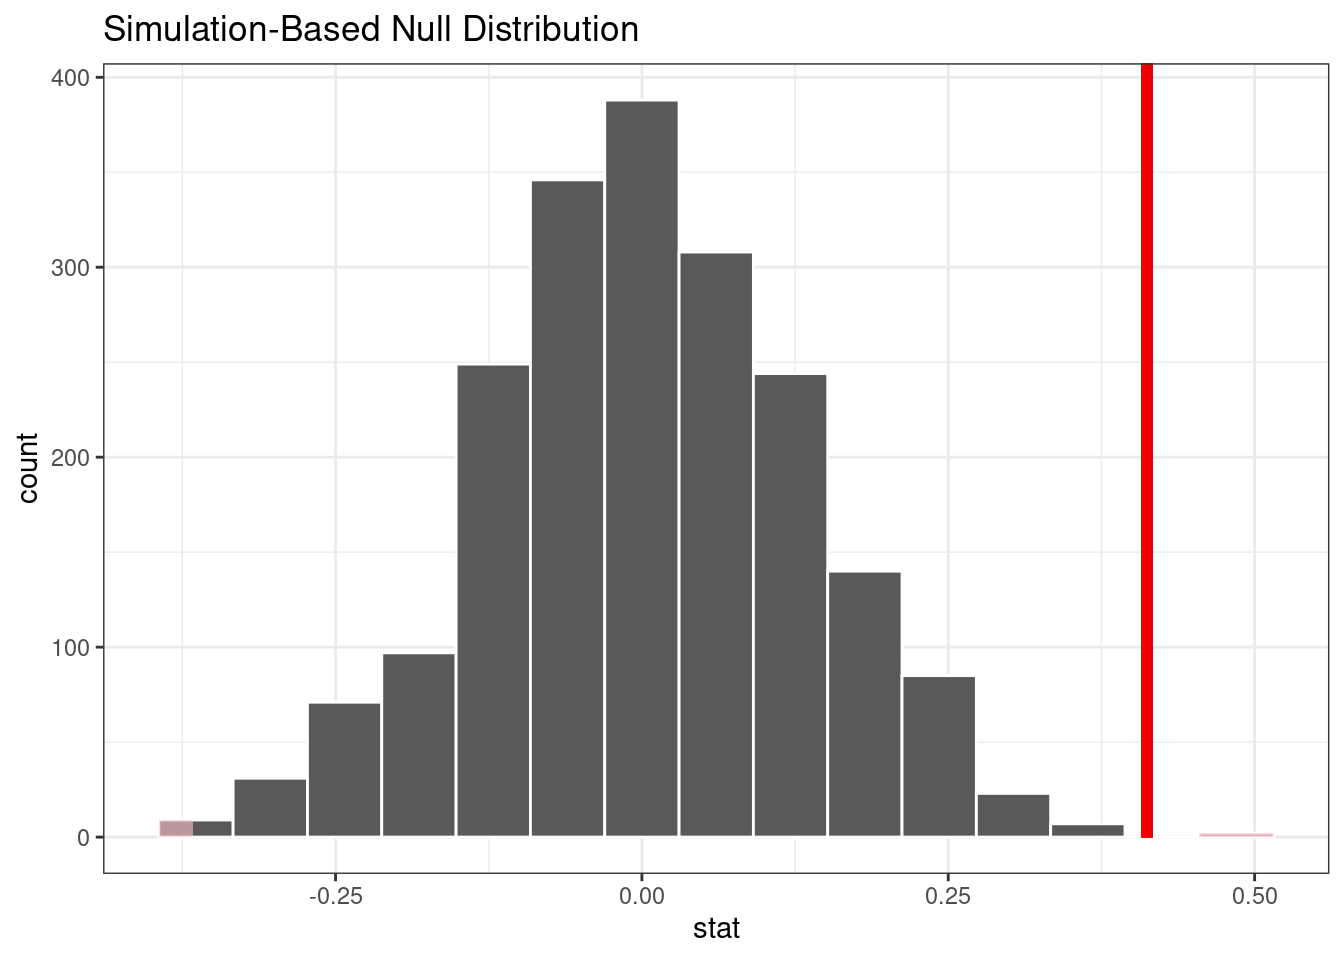 The empirical distribution of the test statistic under the null hypothesis. The vertical line indicates the observed test statistic and is far away form the mainstream of the distribution.